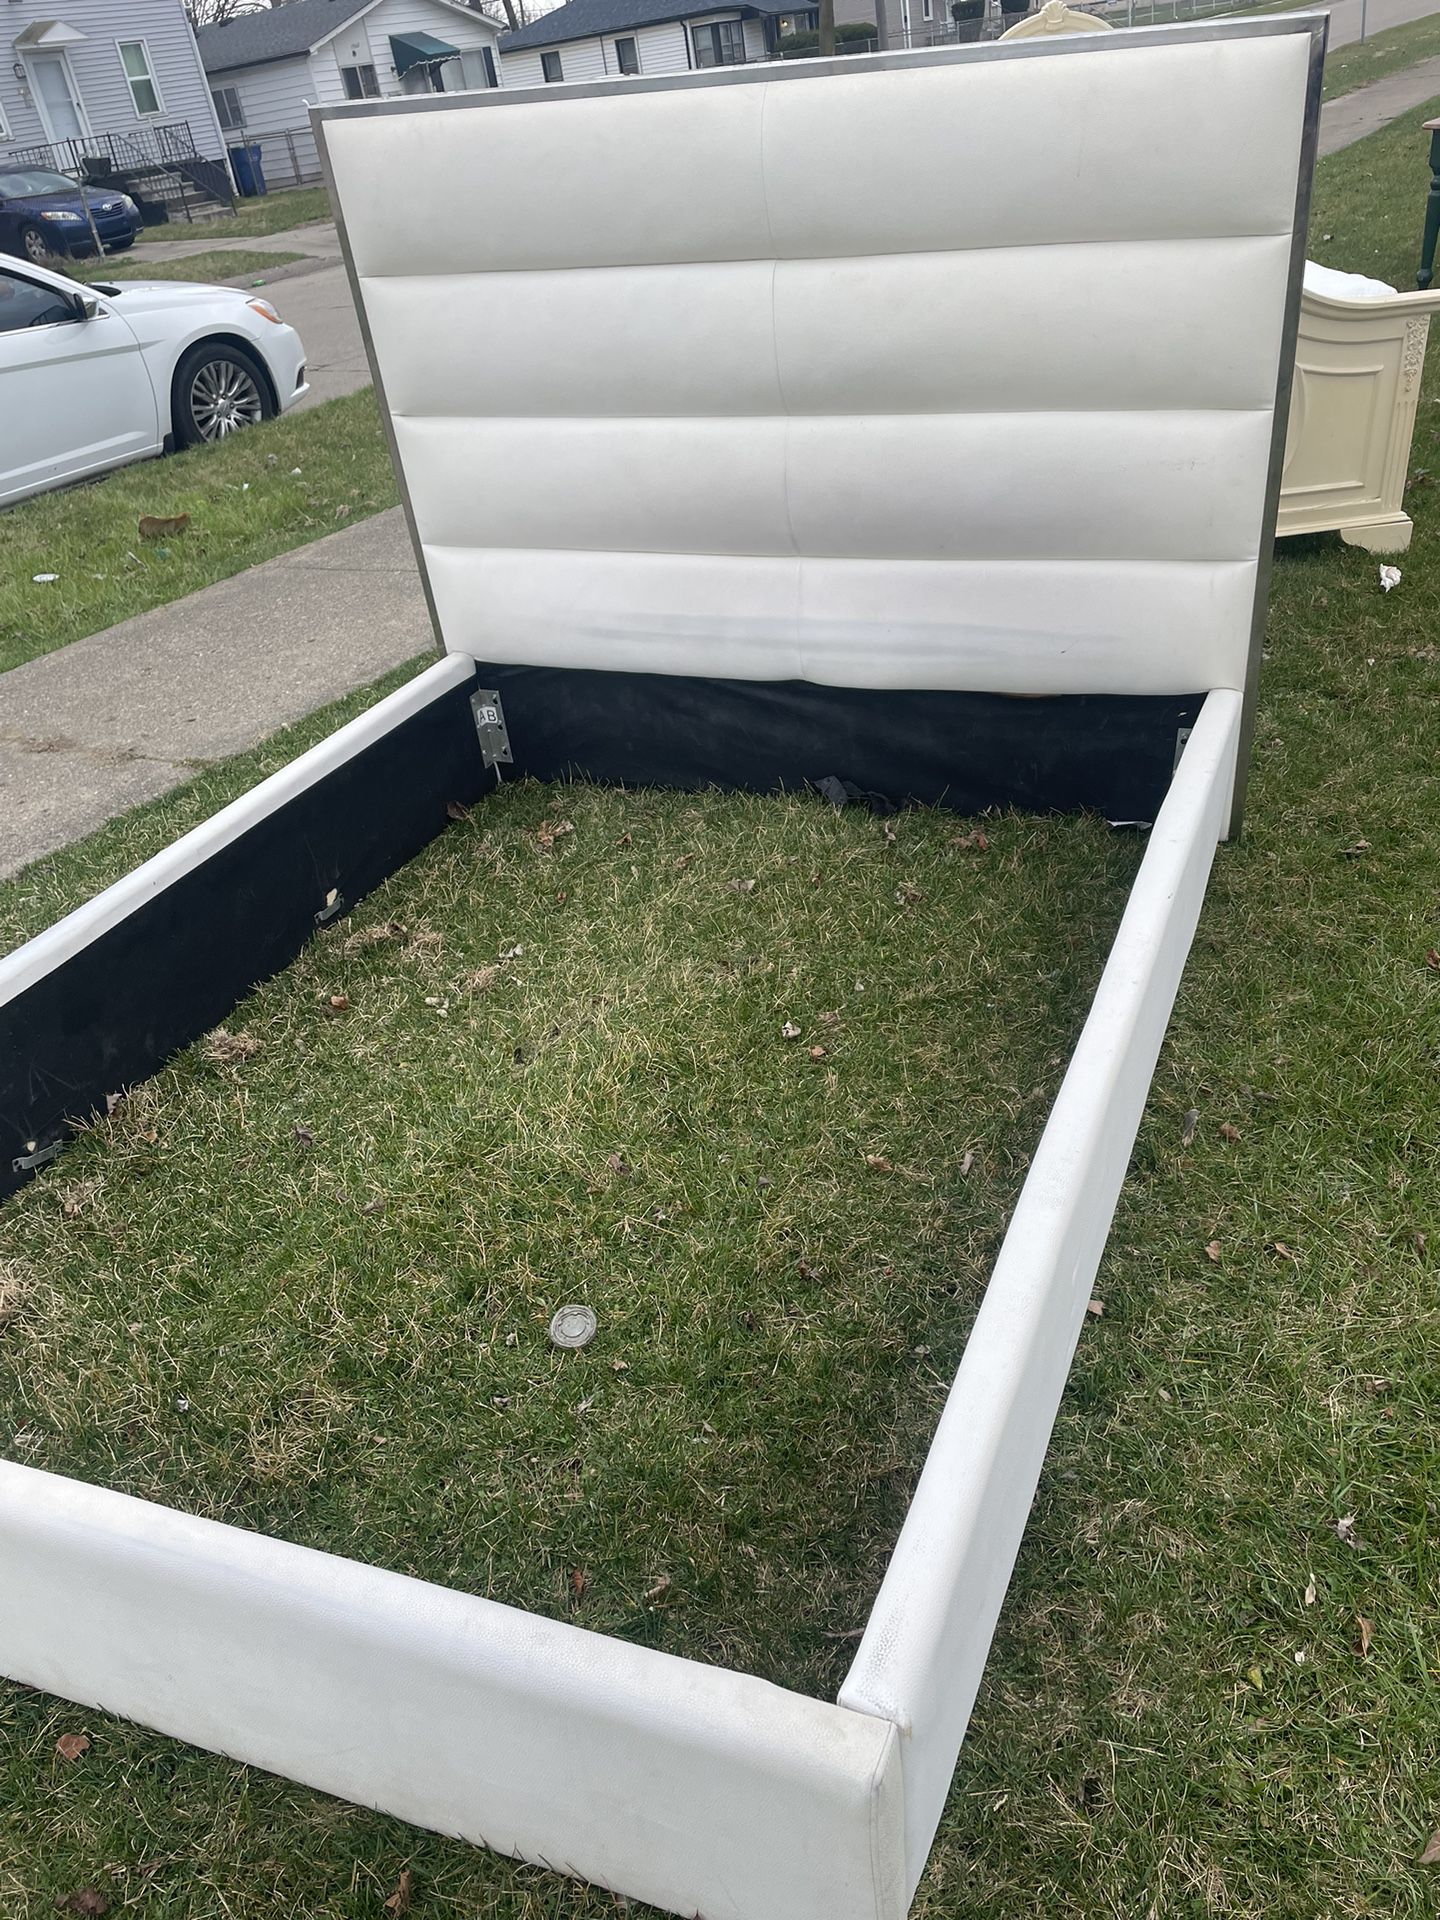 Queen size Bed Frame $100 